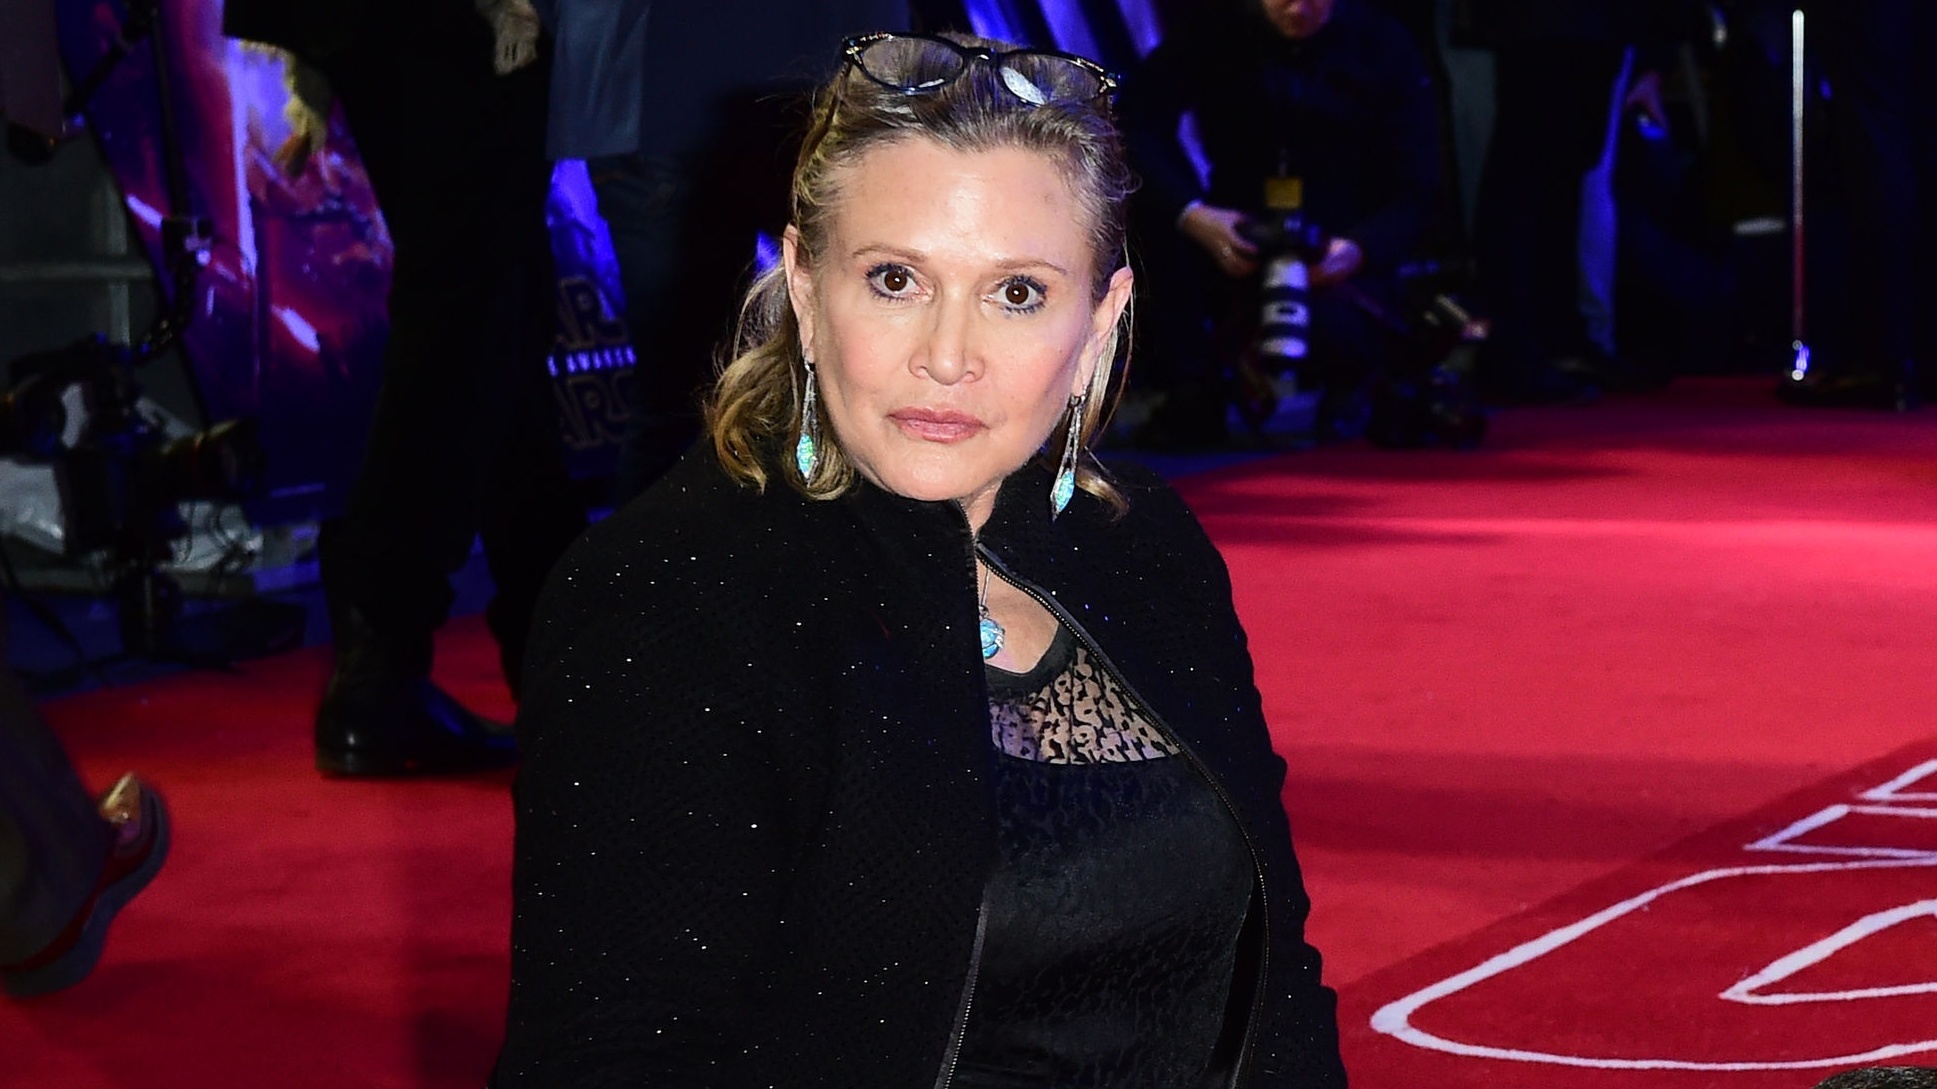 Carrie Fisher took part in a midnight ceilidh at Dundee railway station